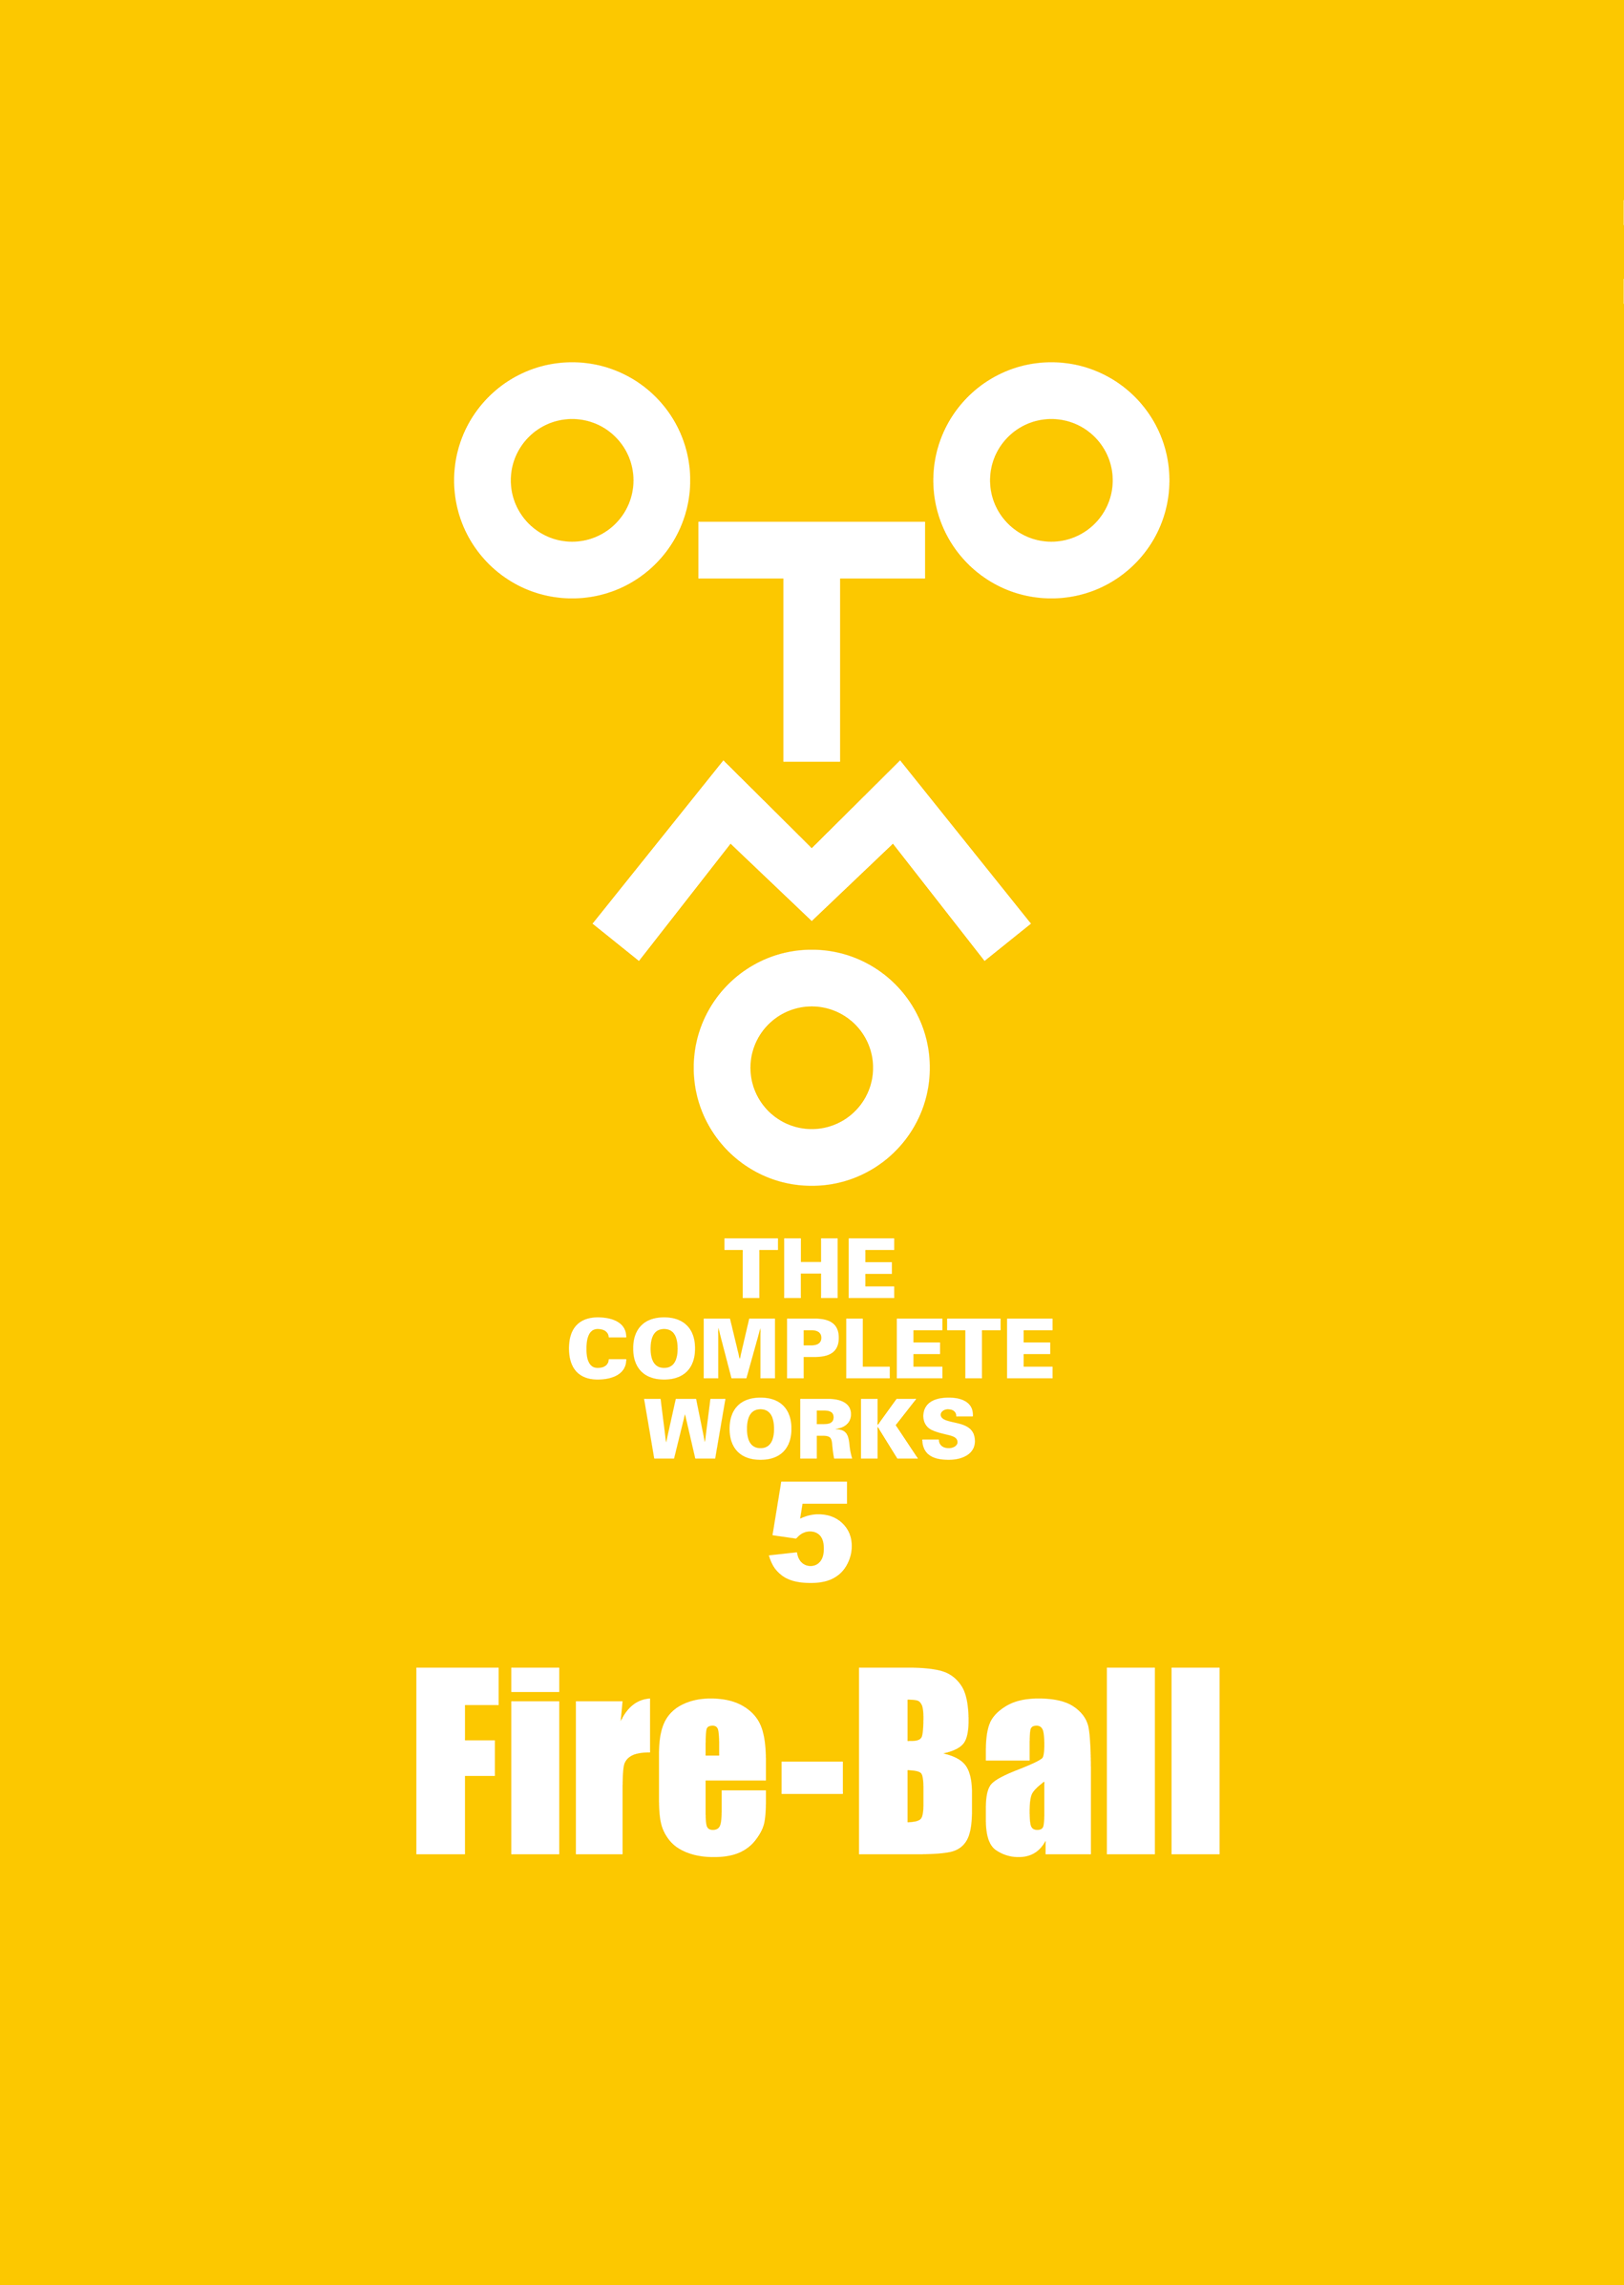 OTOMO THE COMPLETE WORKS 5 [Fire-Ball]